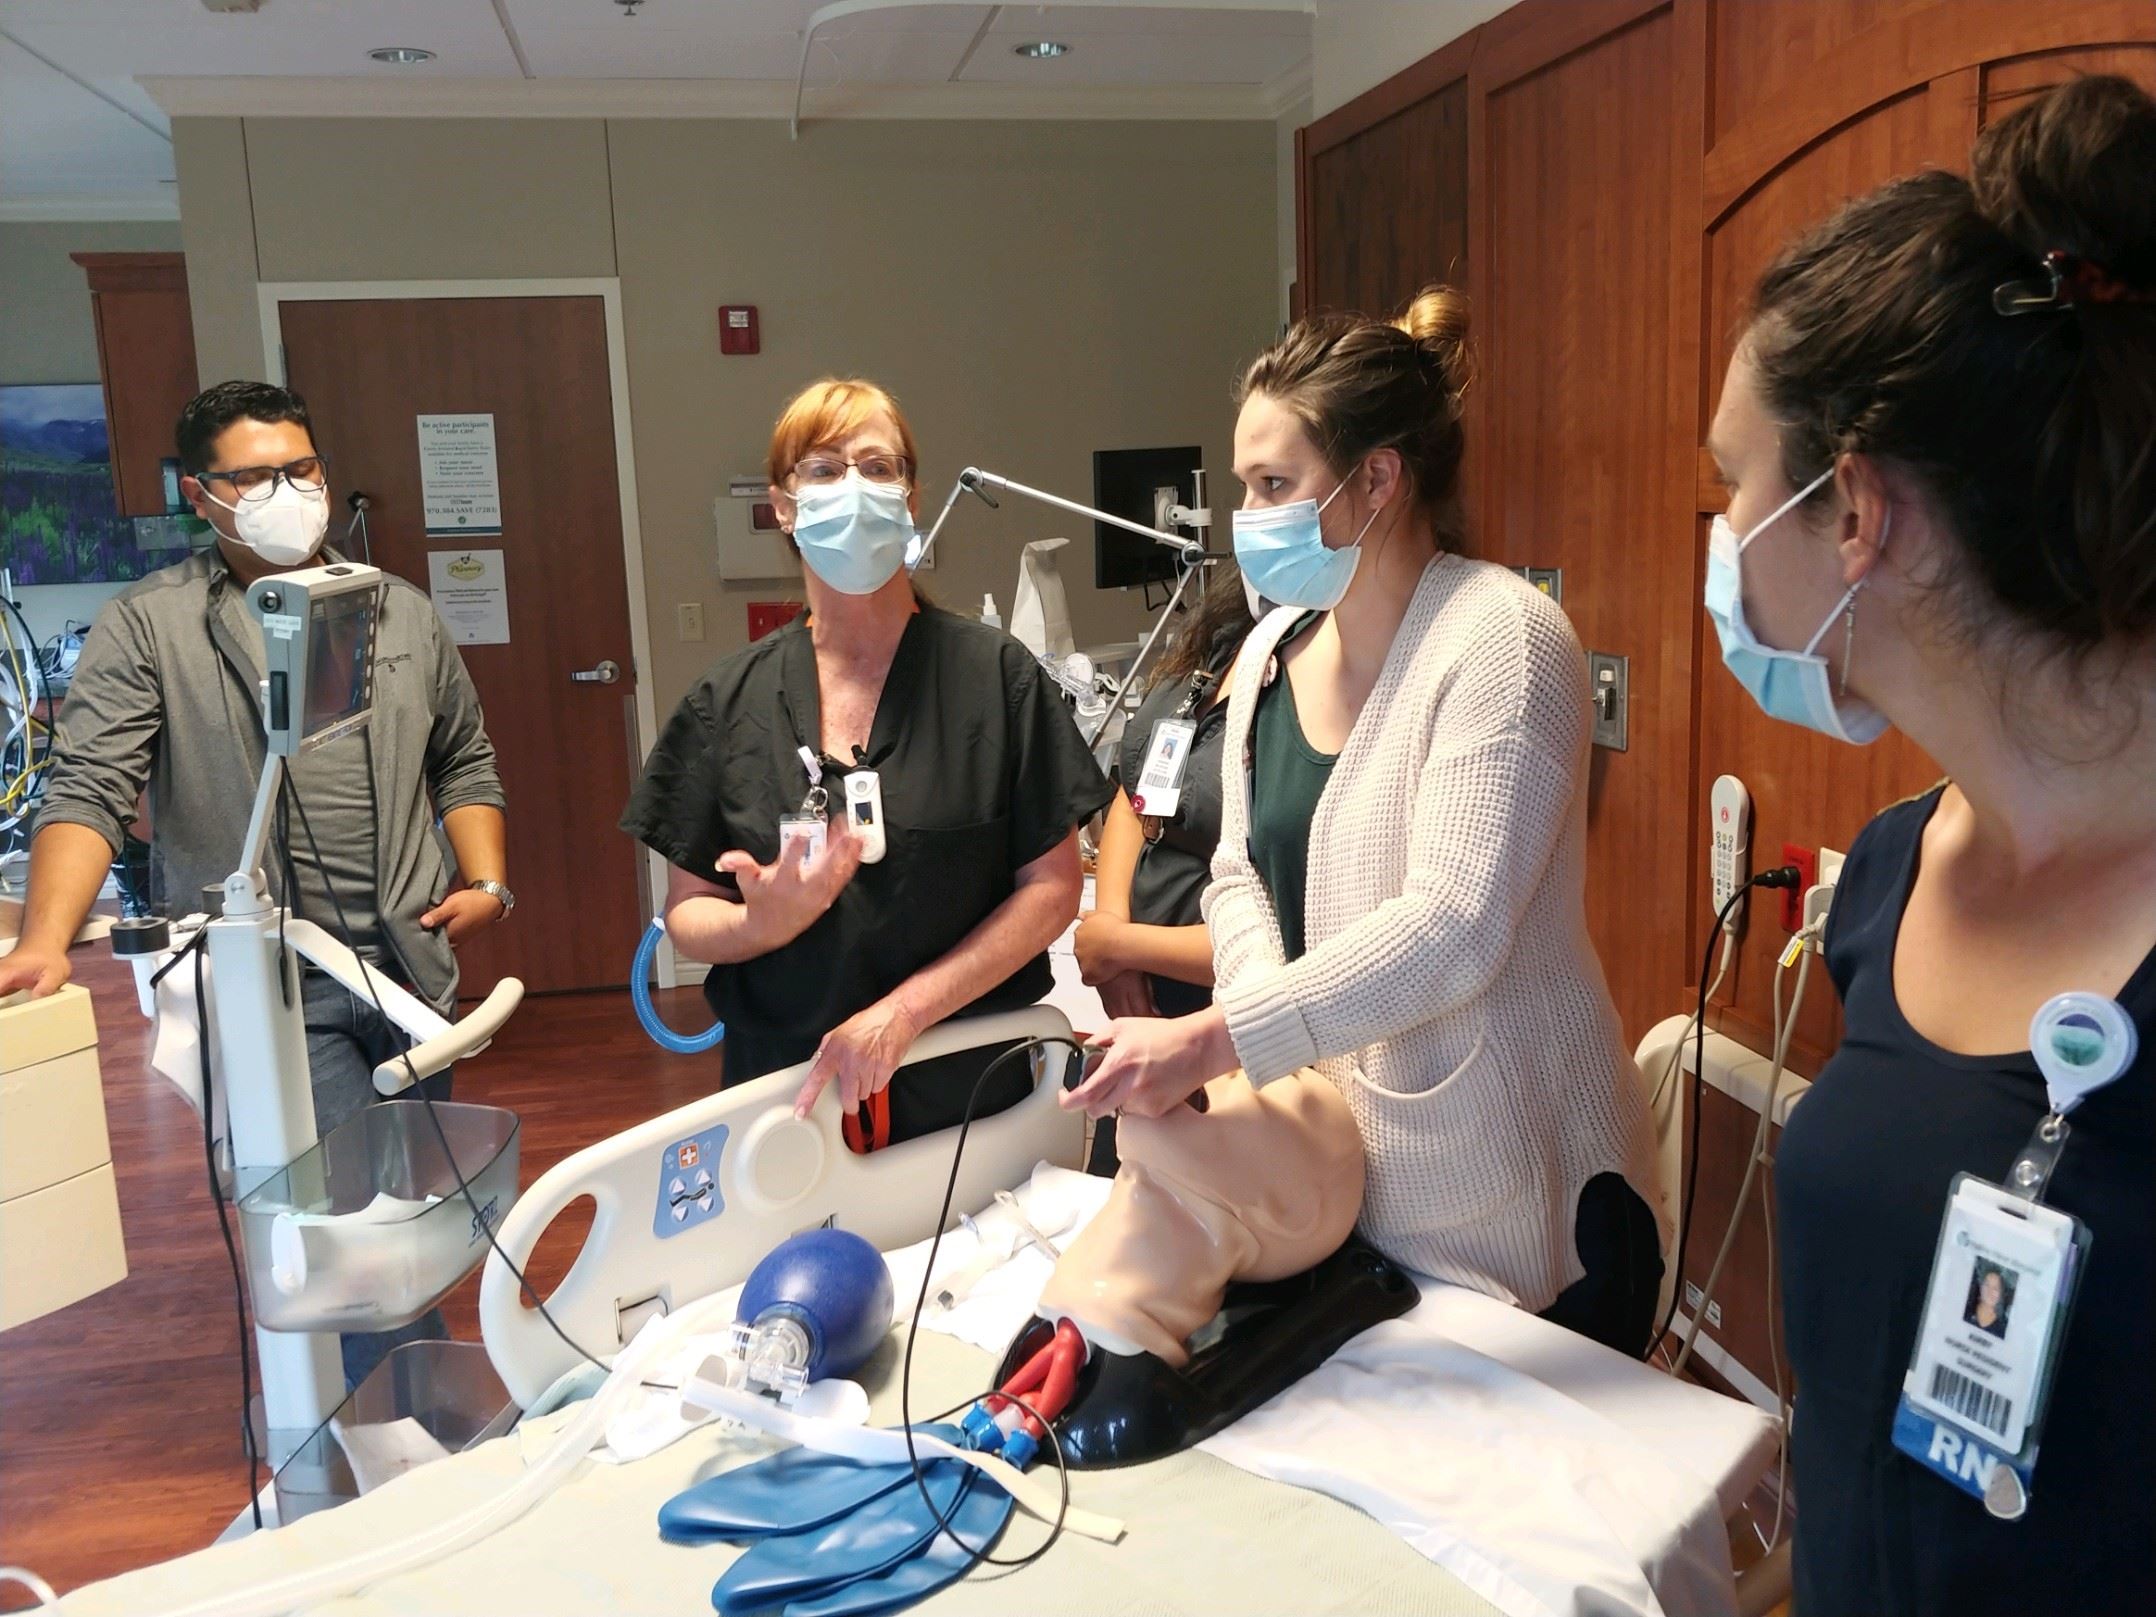 providers in training while wearing masks